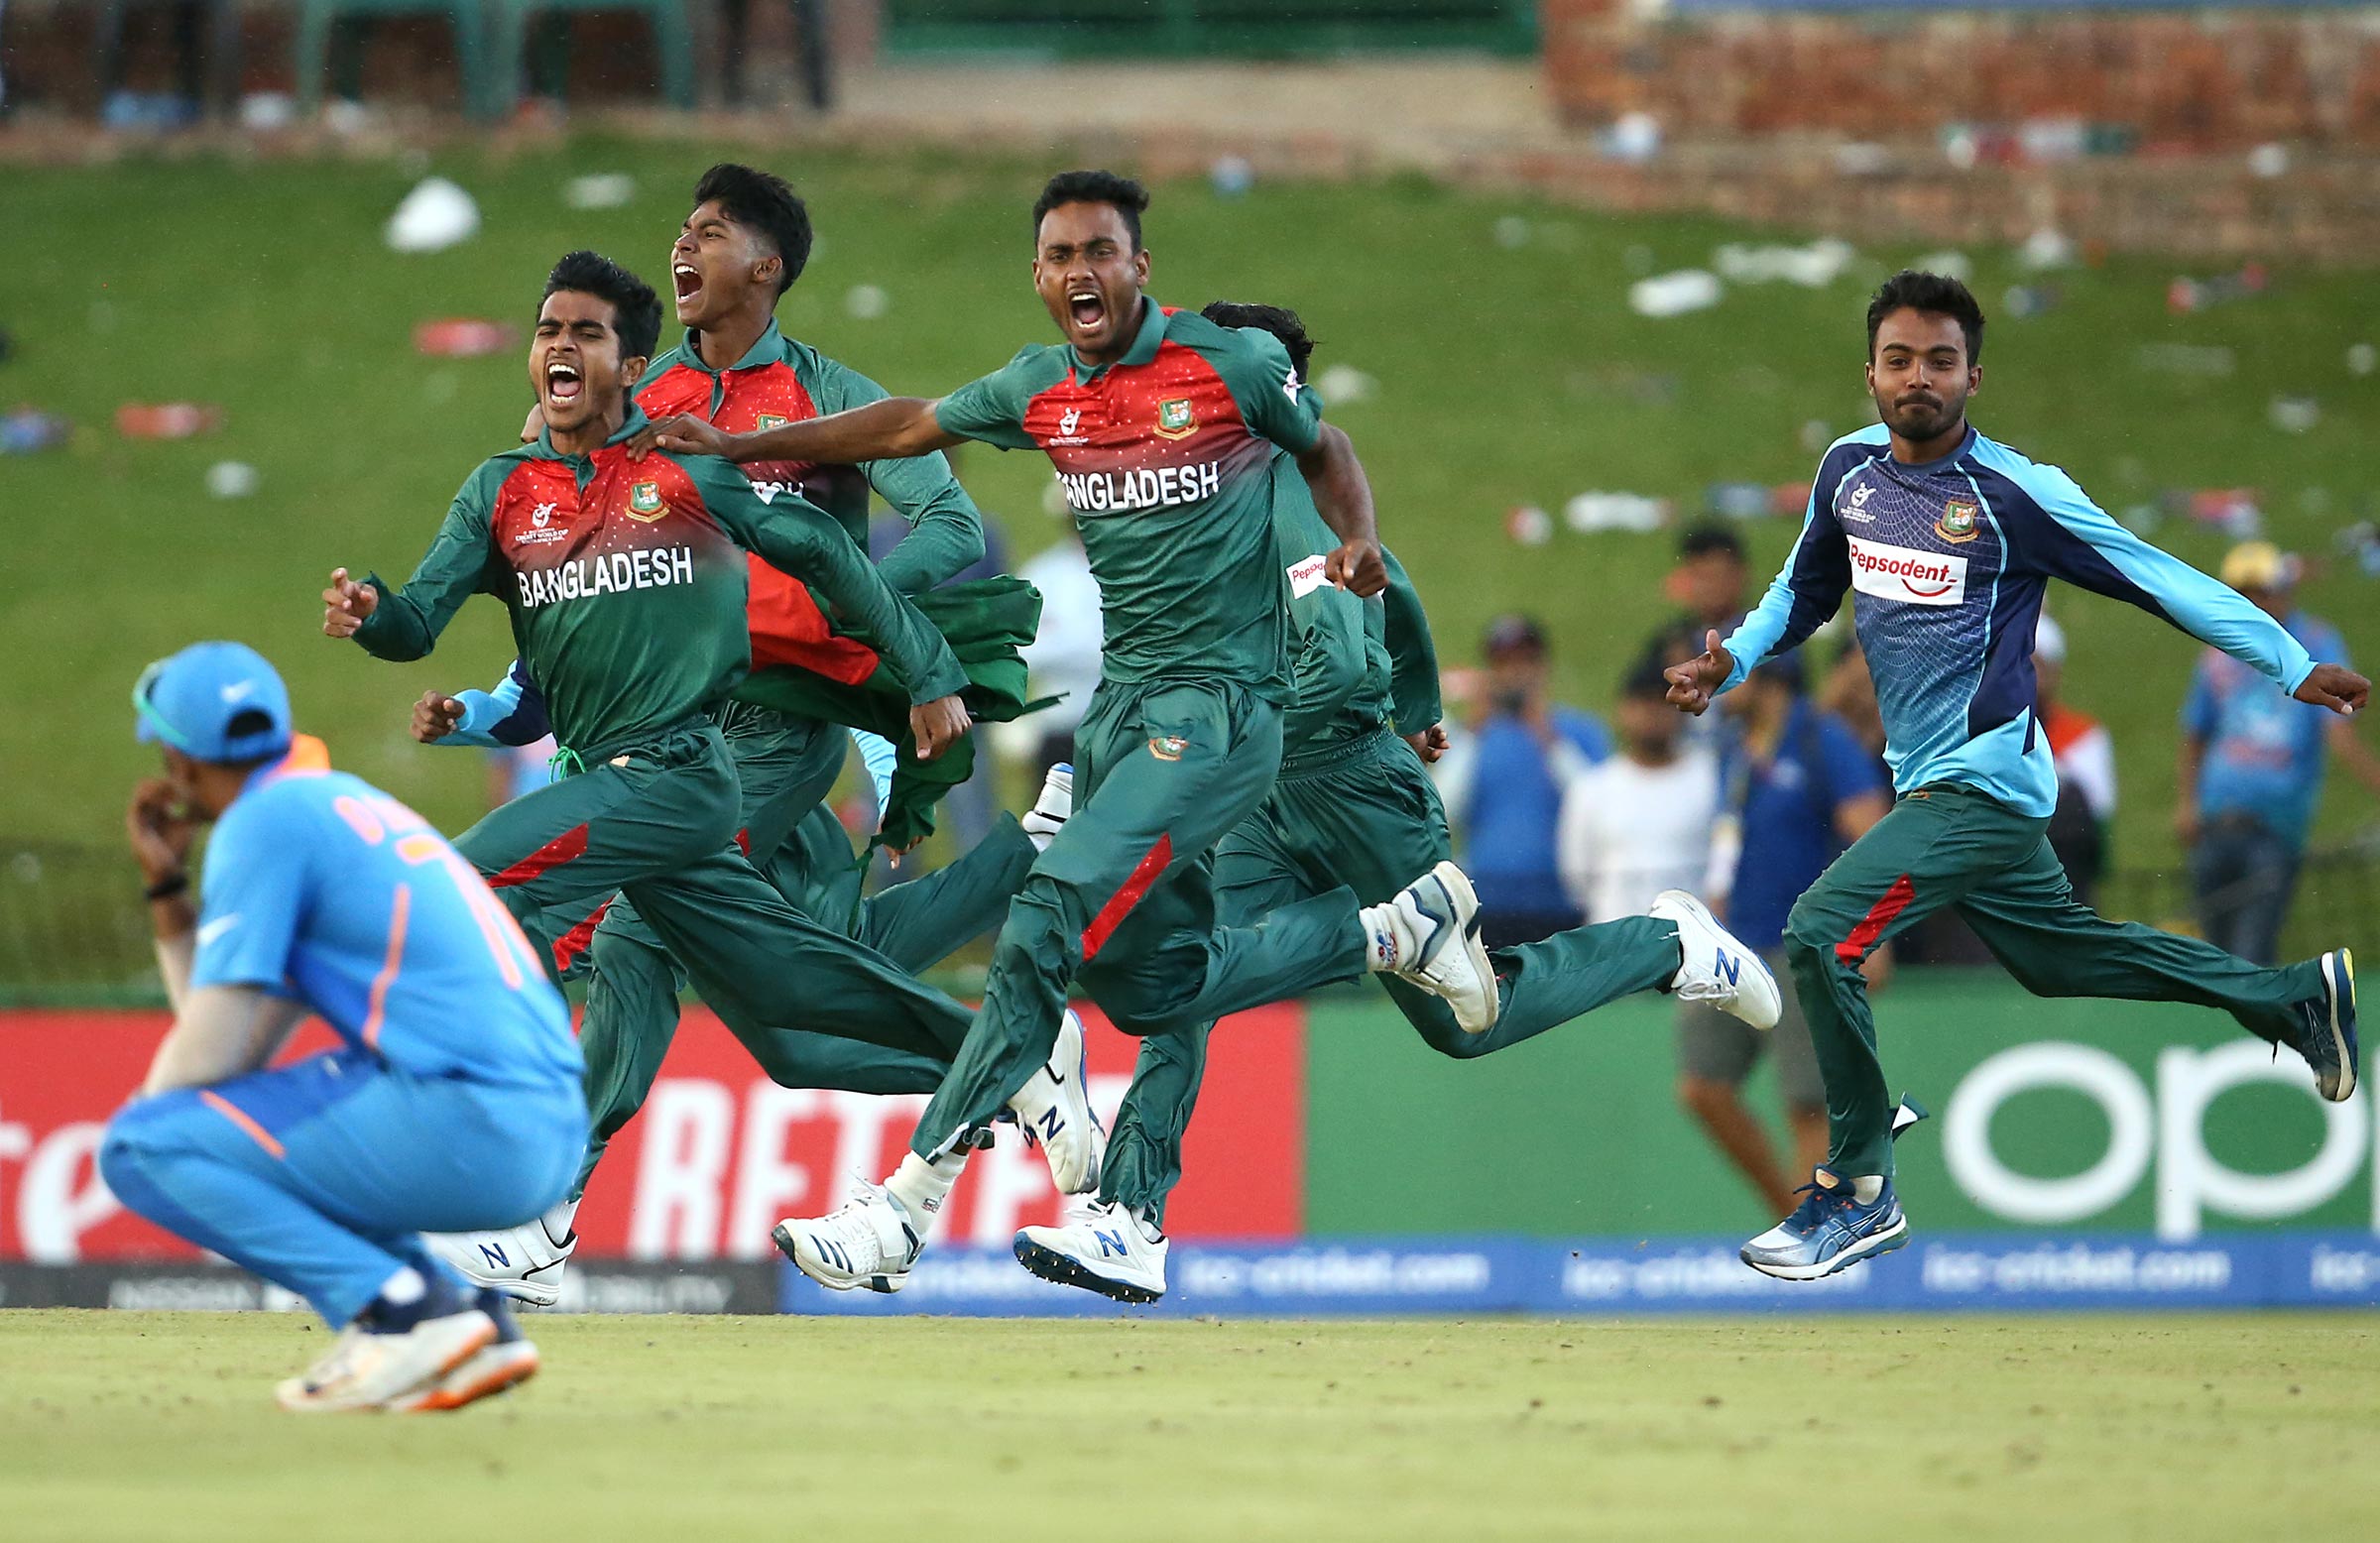 U19 World Cup Finals Ugly Scenario Three From Bangladesh And Two From India Found Guility